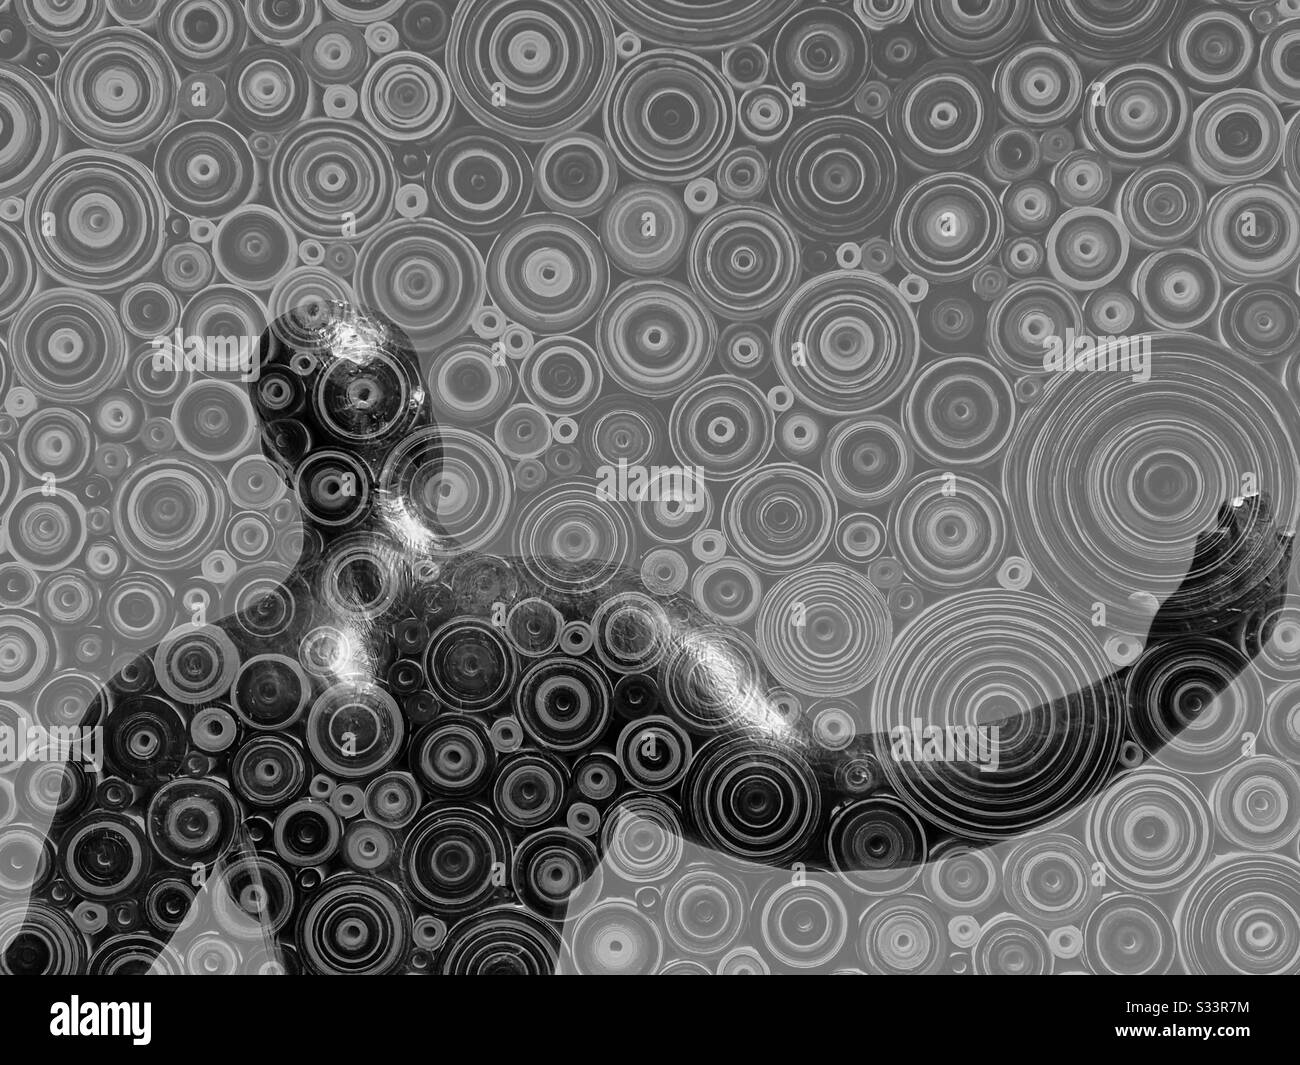 Overlapping art works - the back of a sculpture of a muscular woman and an abstract painting of circles - in black and white Stock Photo